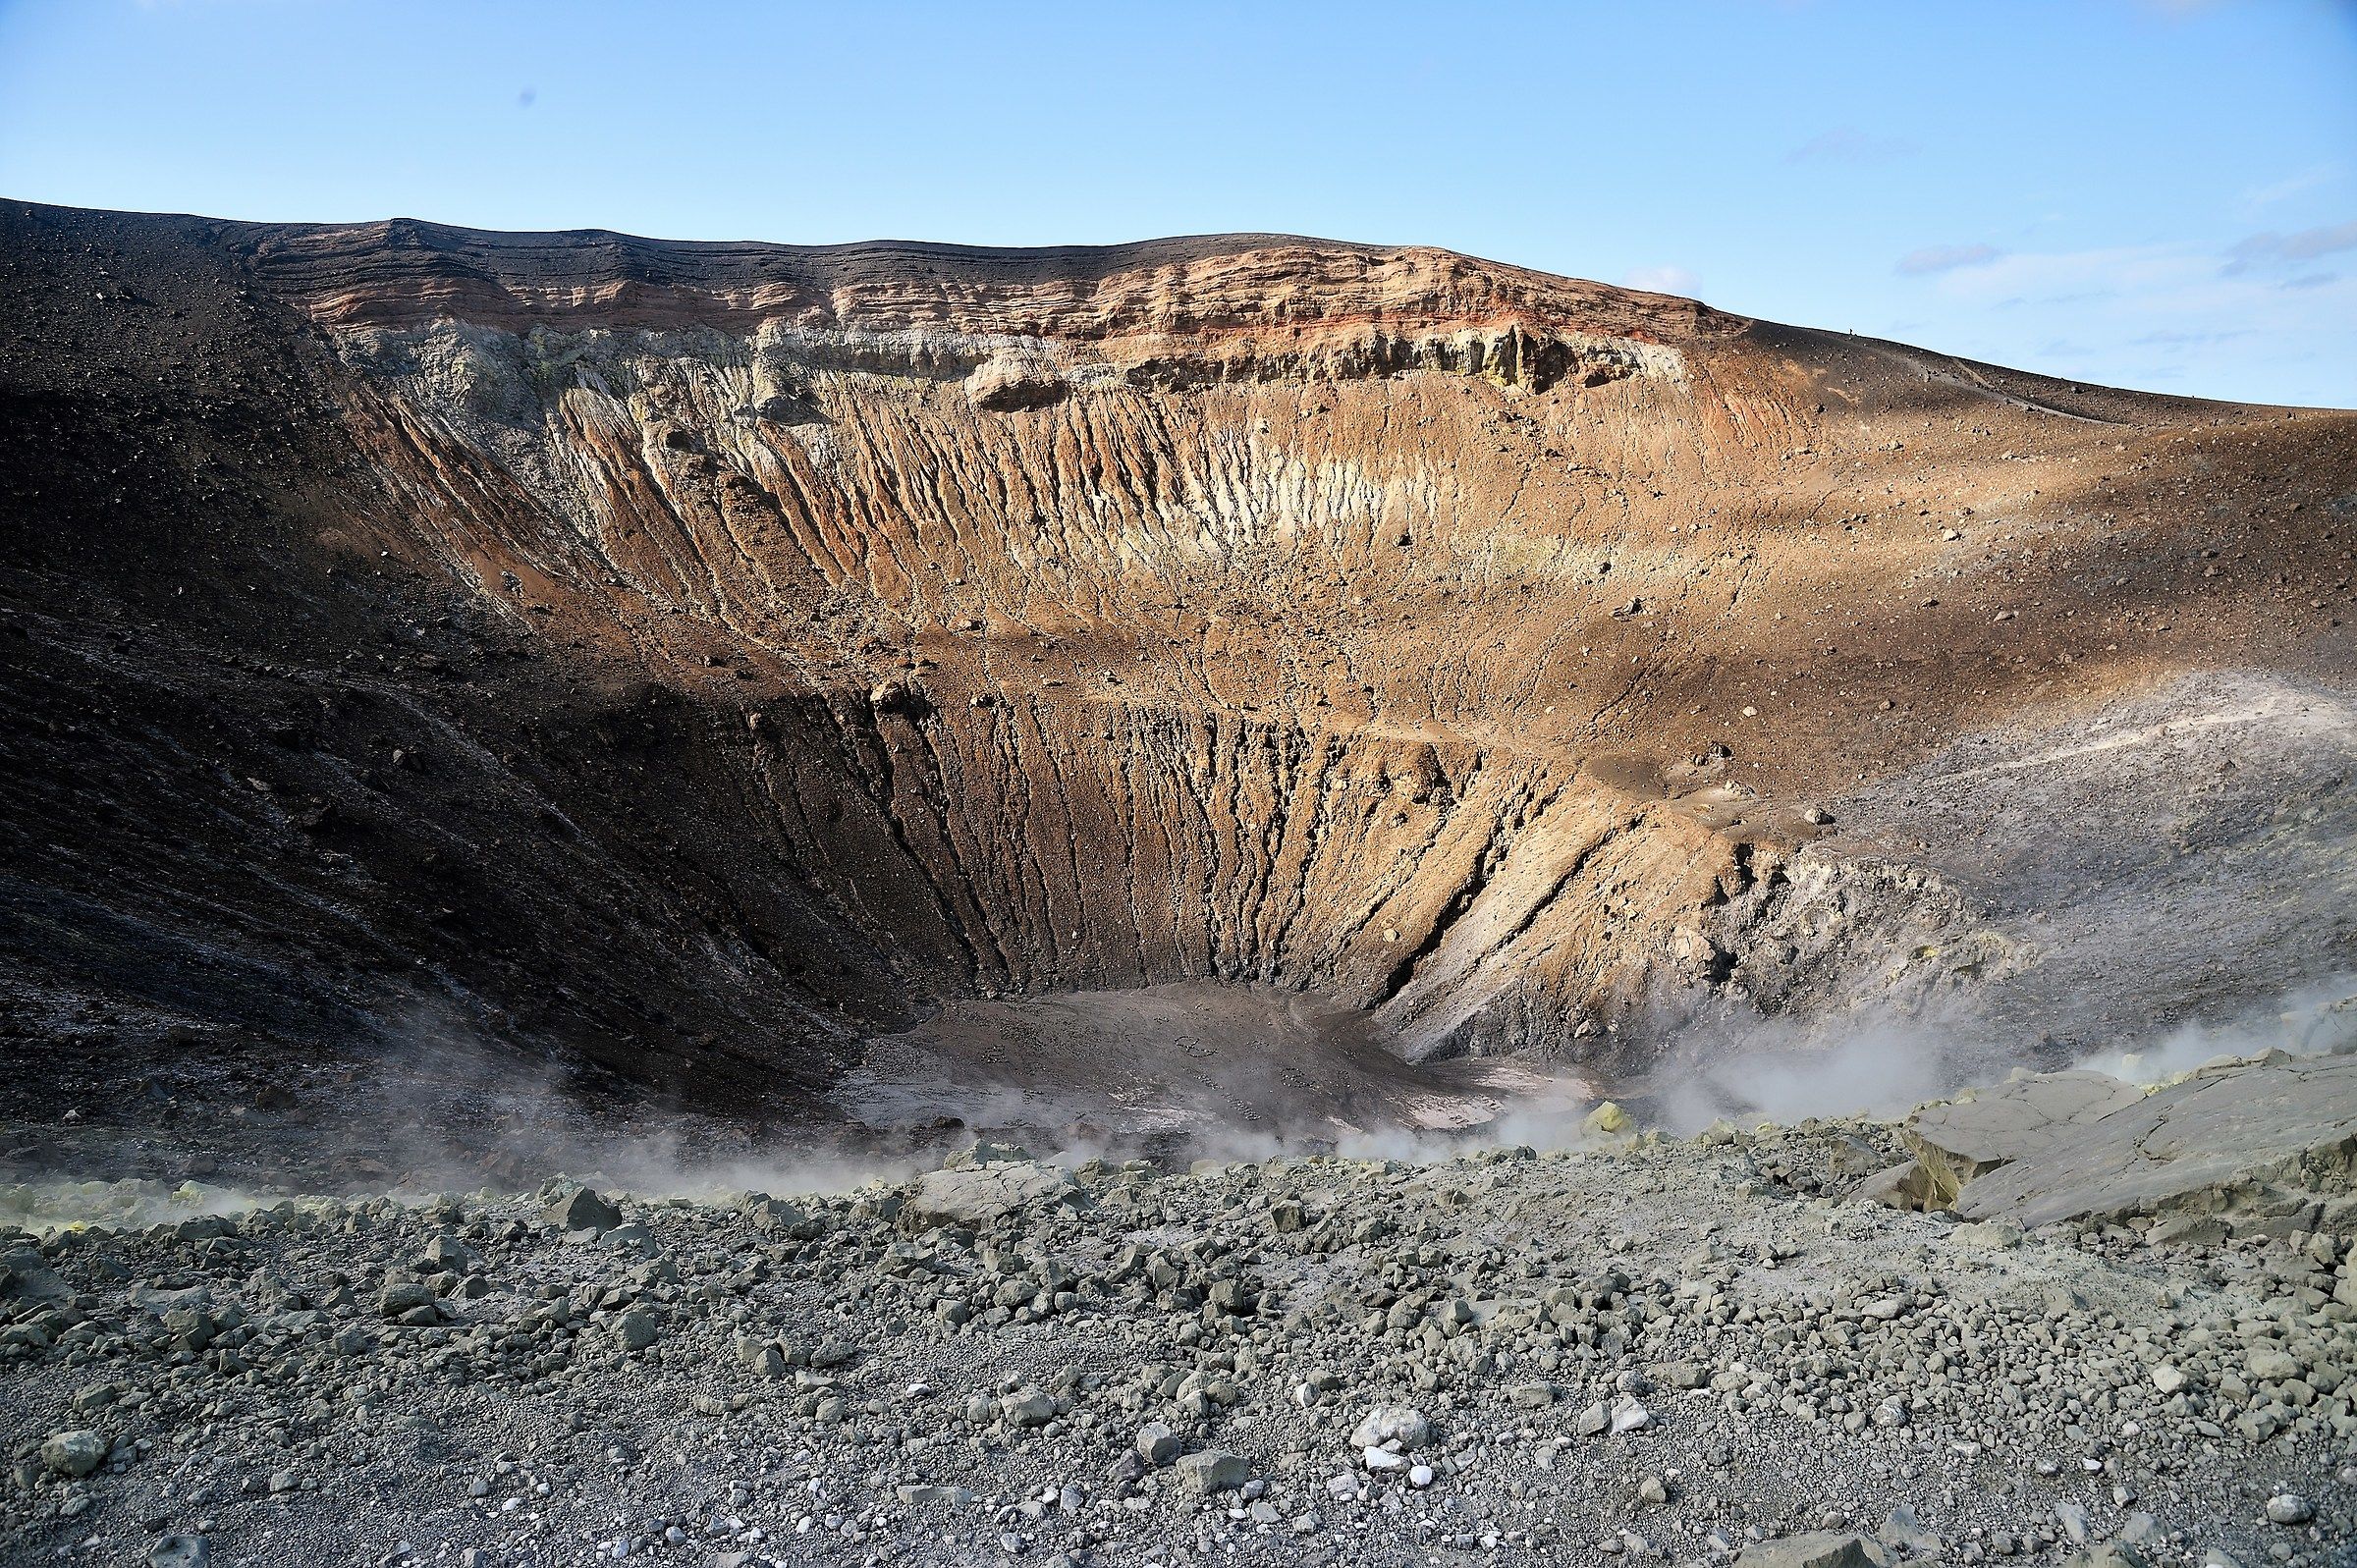 The crater...